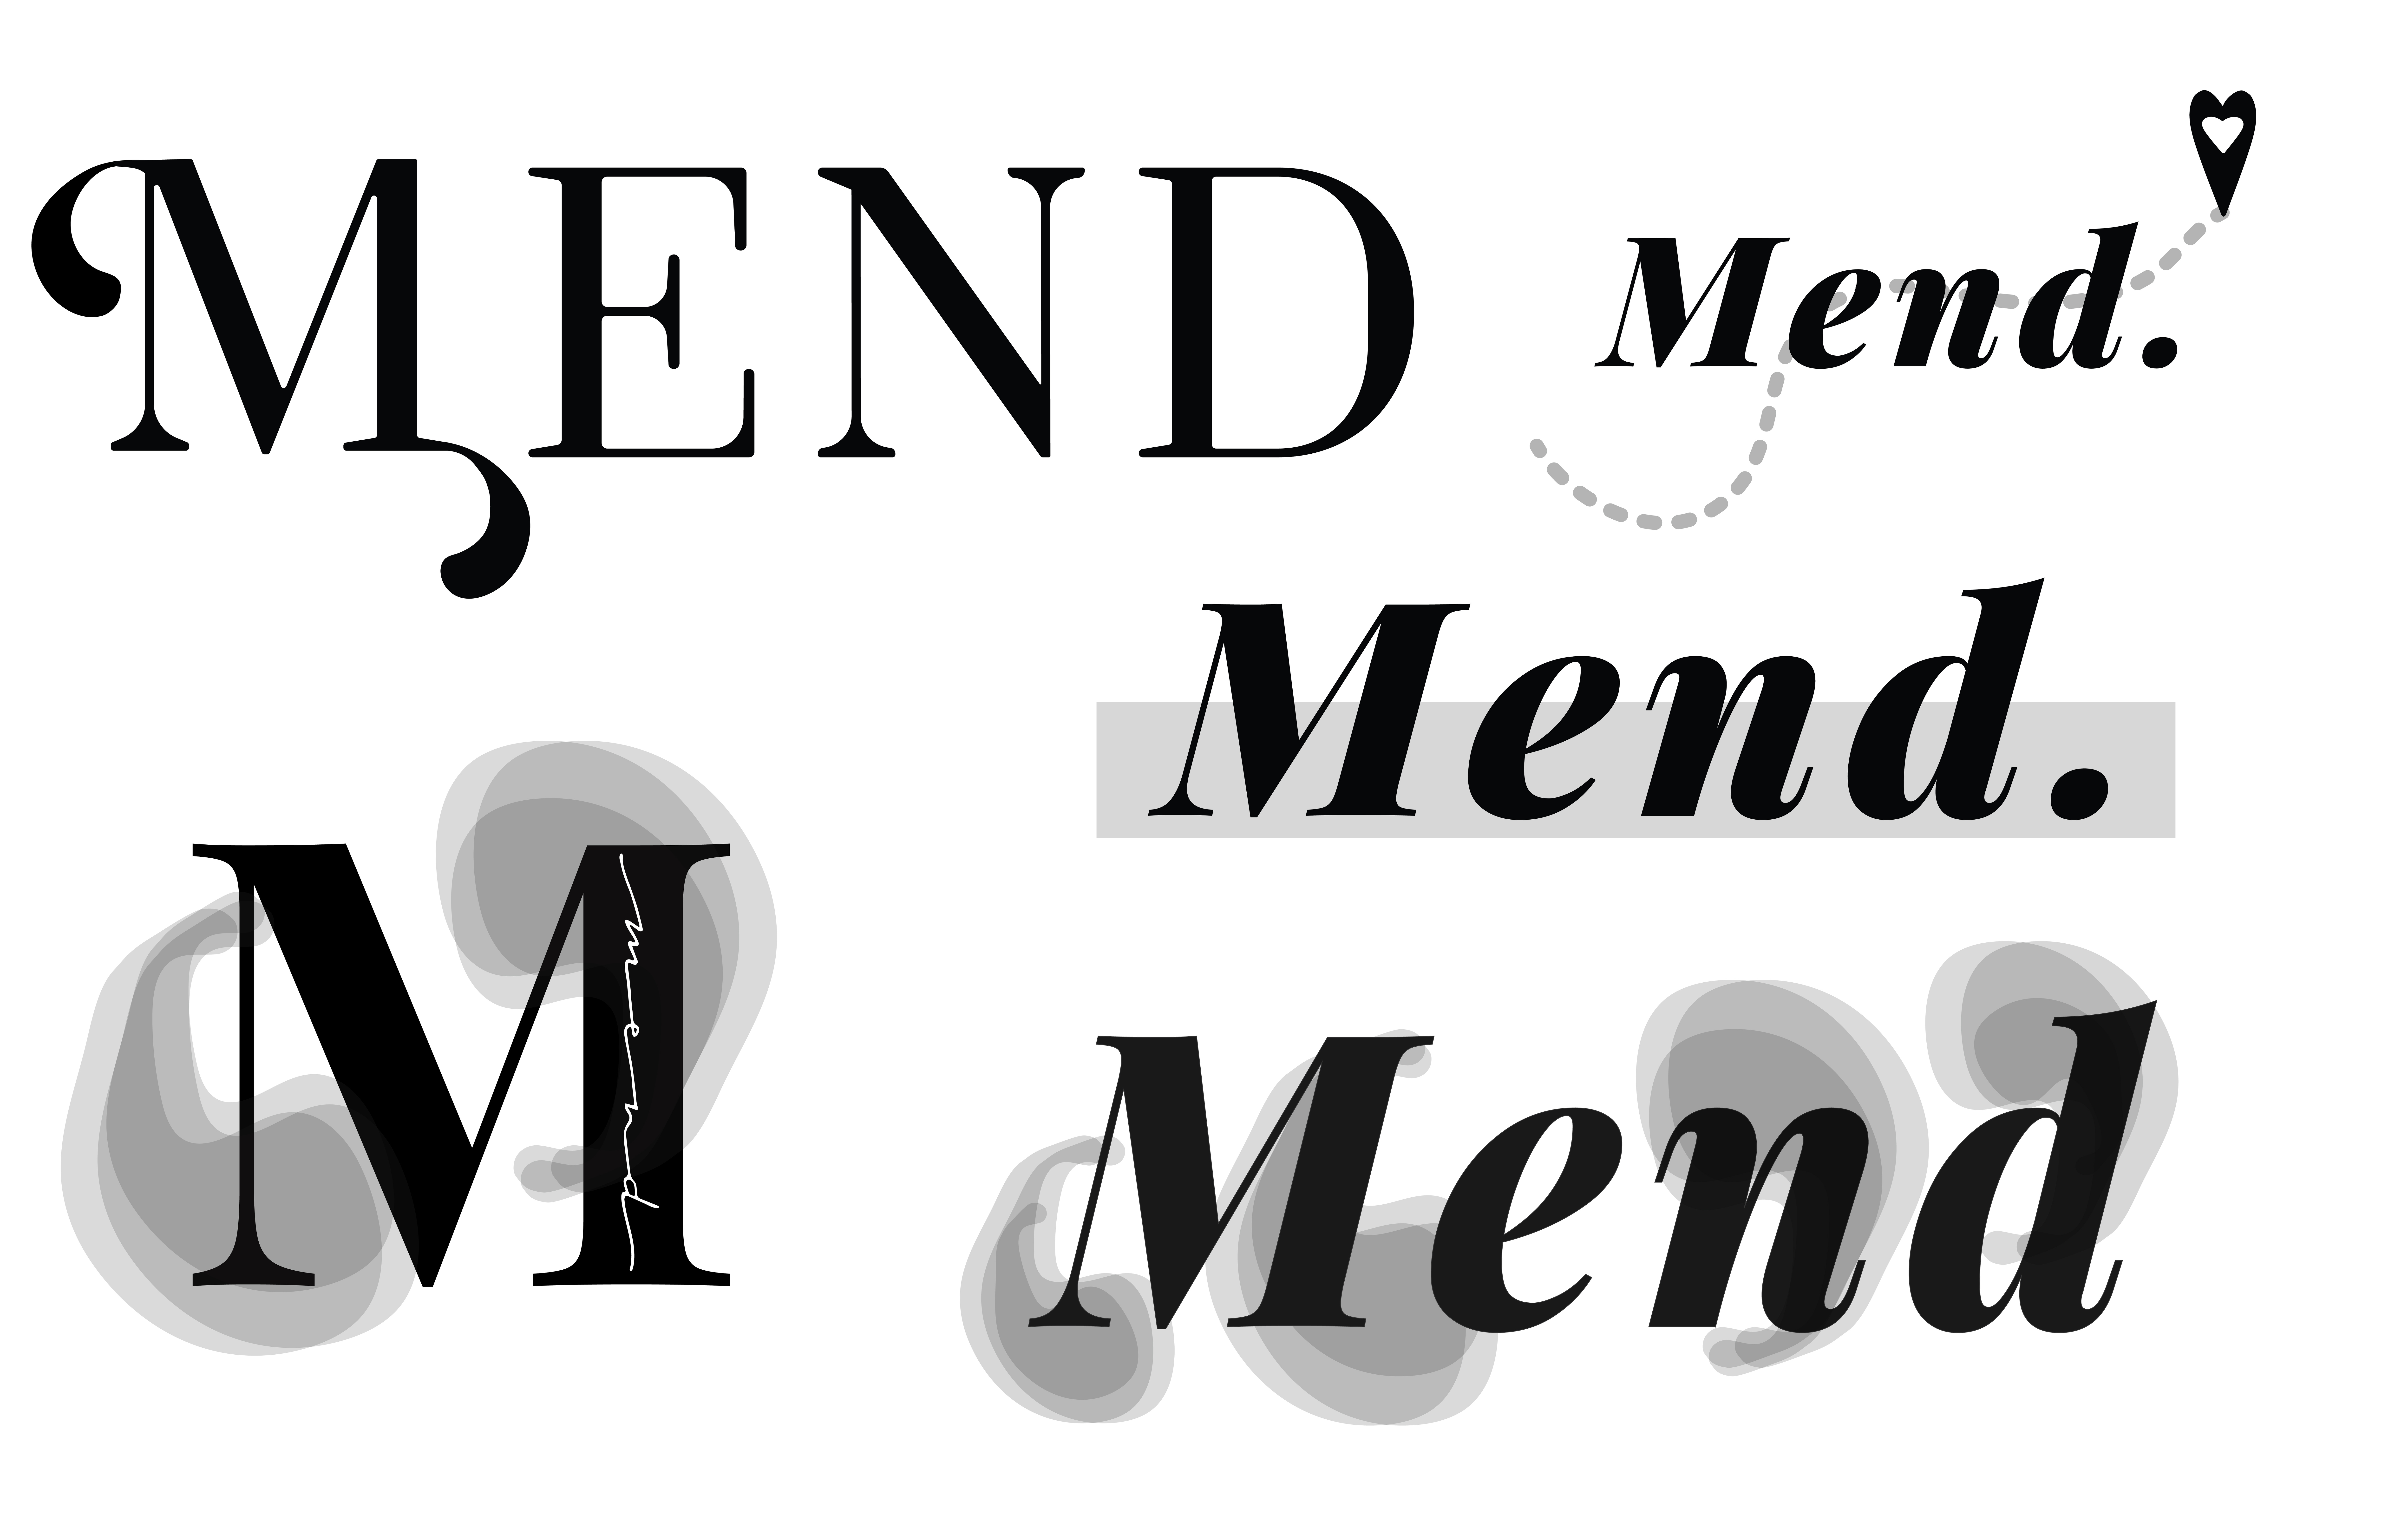 Initial logos I created when the project was still named Mend.